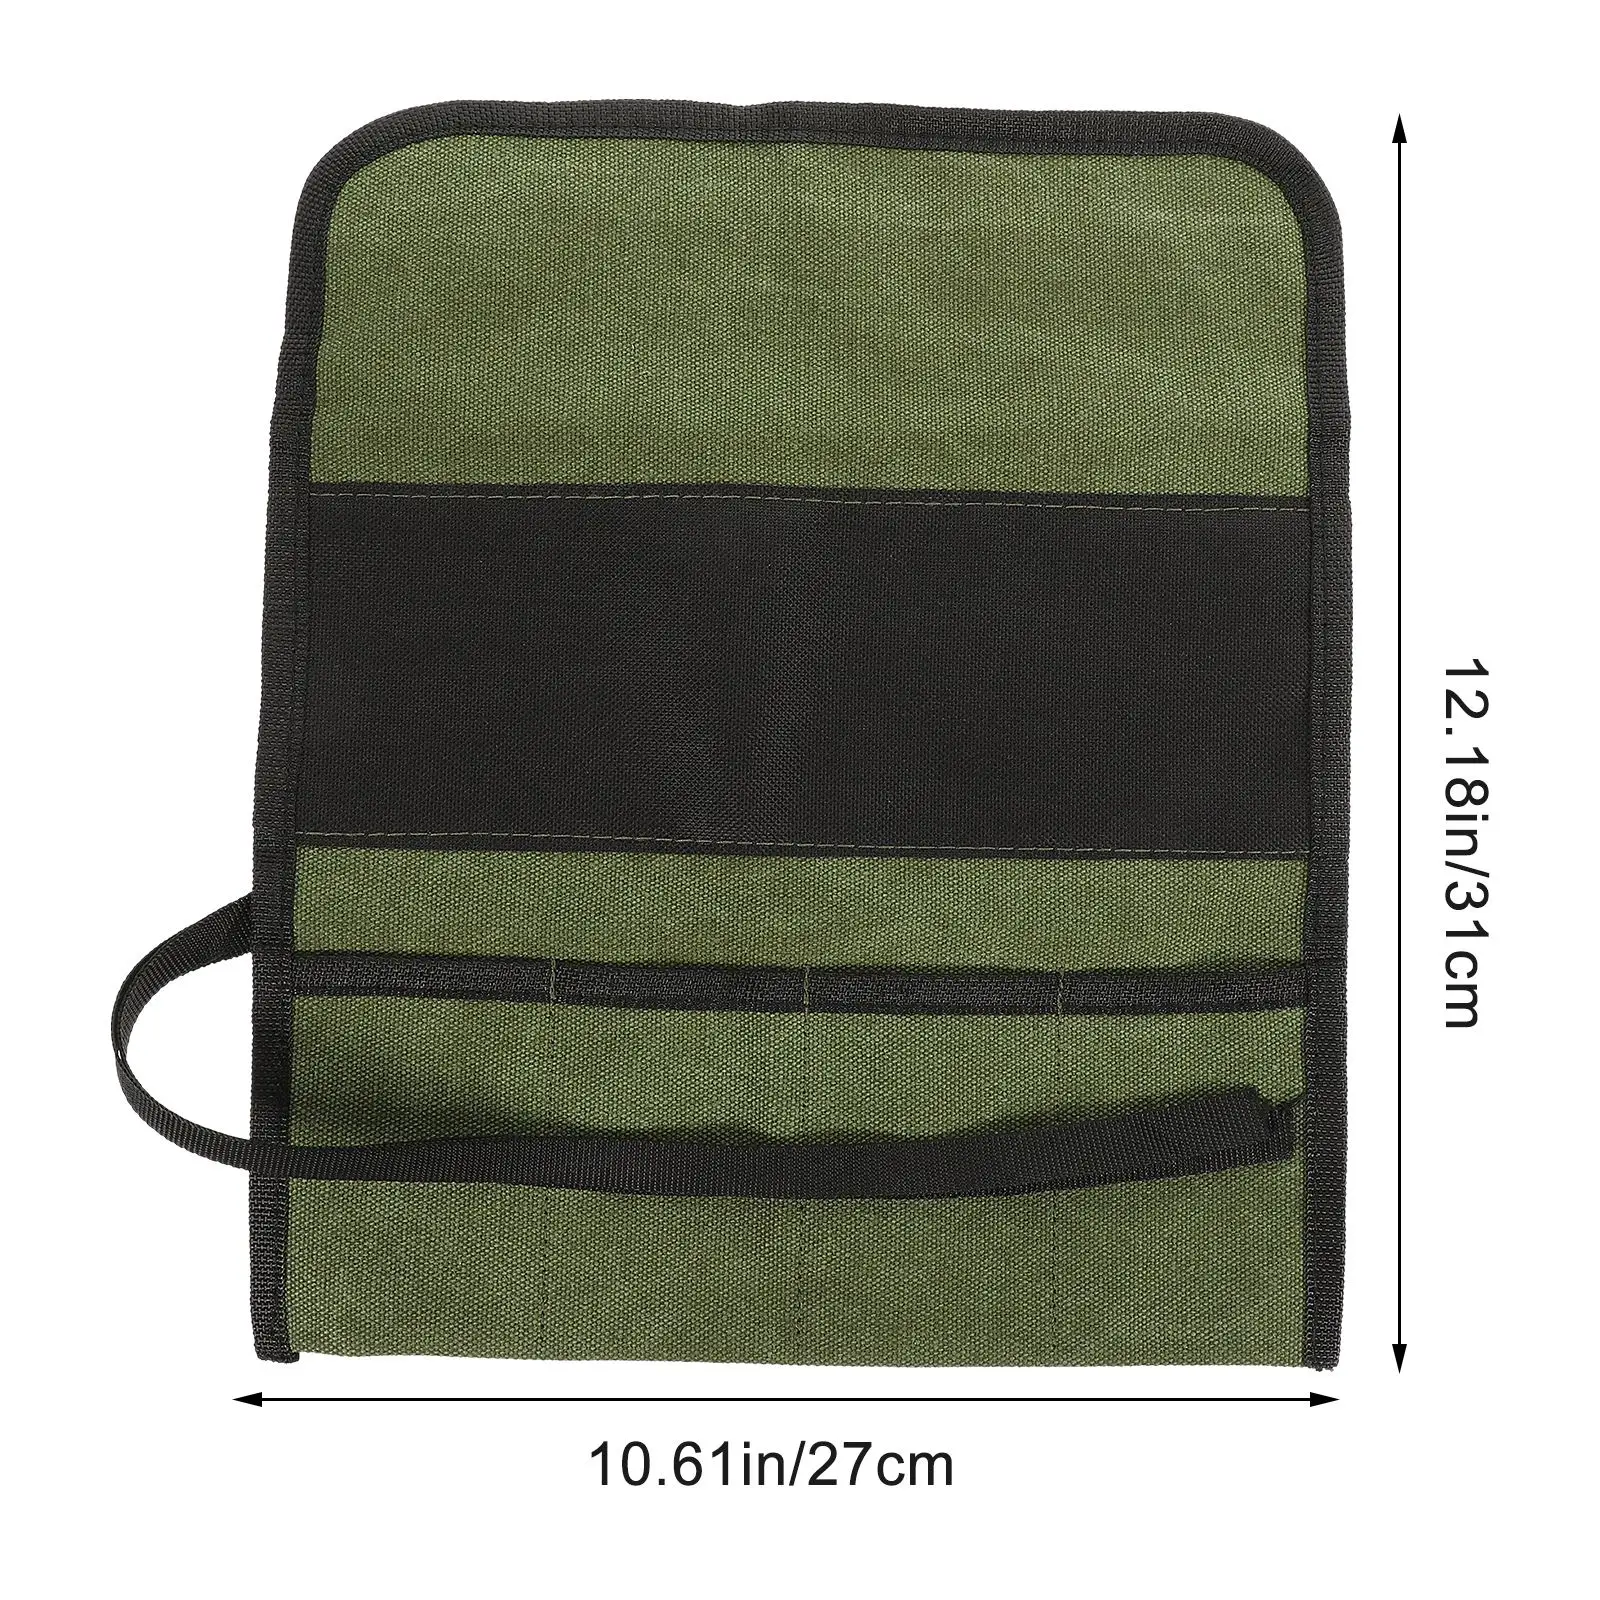 Tool Roll Bag Wrench Pouch Canvas Tool Pouch Roll Up Pouch Multipurpose Pouch Tote Bag Sculpture Chisel Canvas Bag Drum Tool Kit